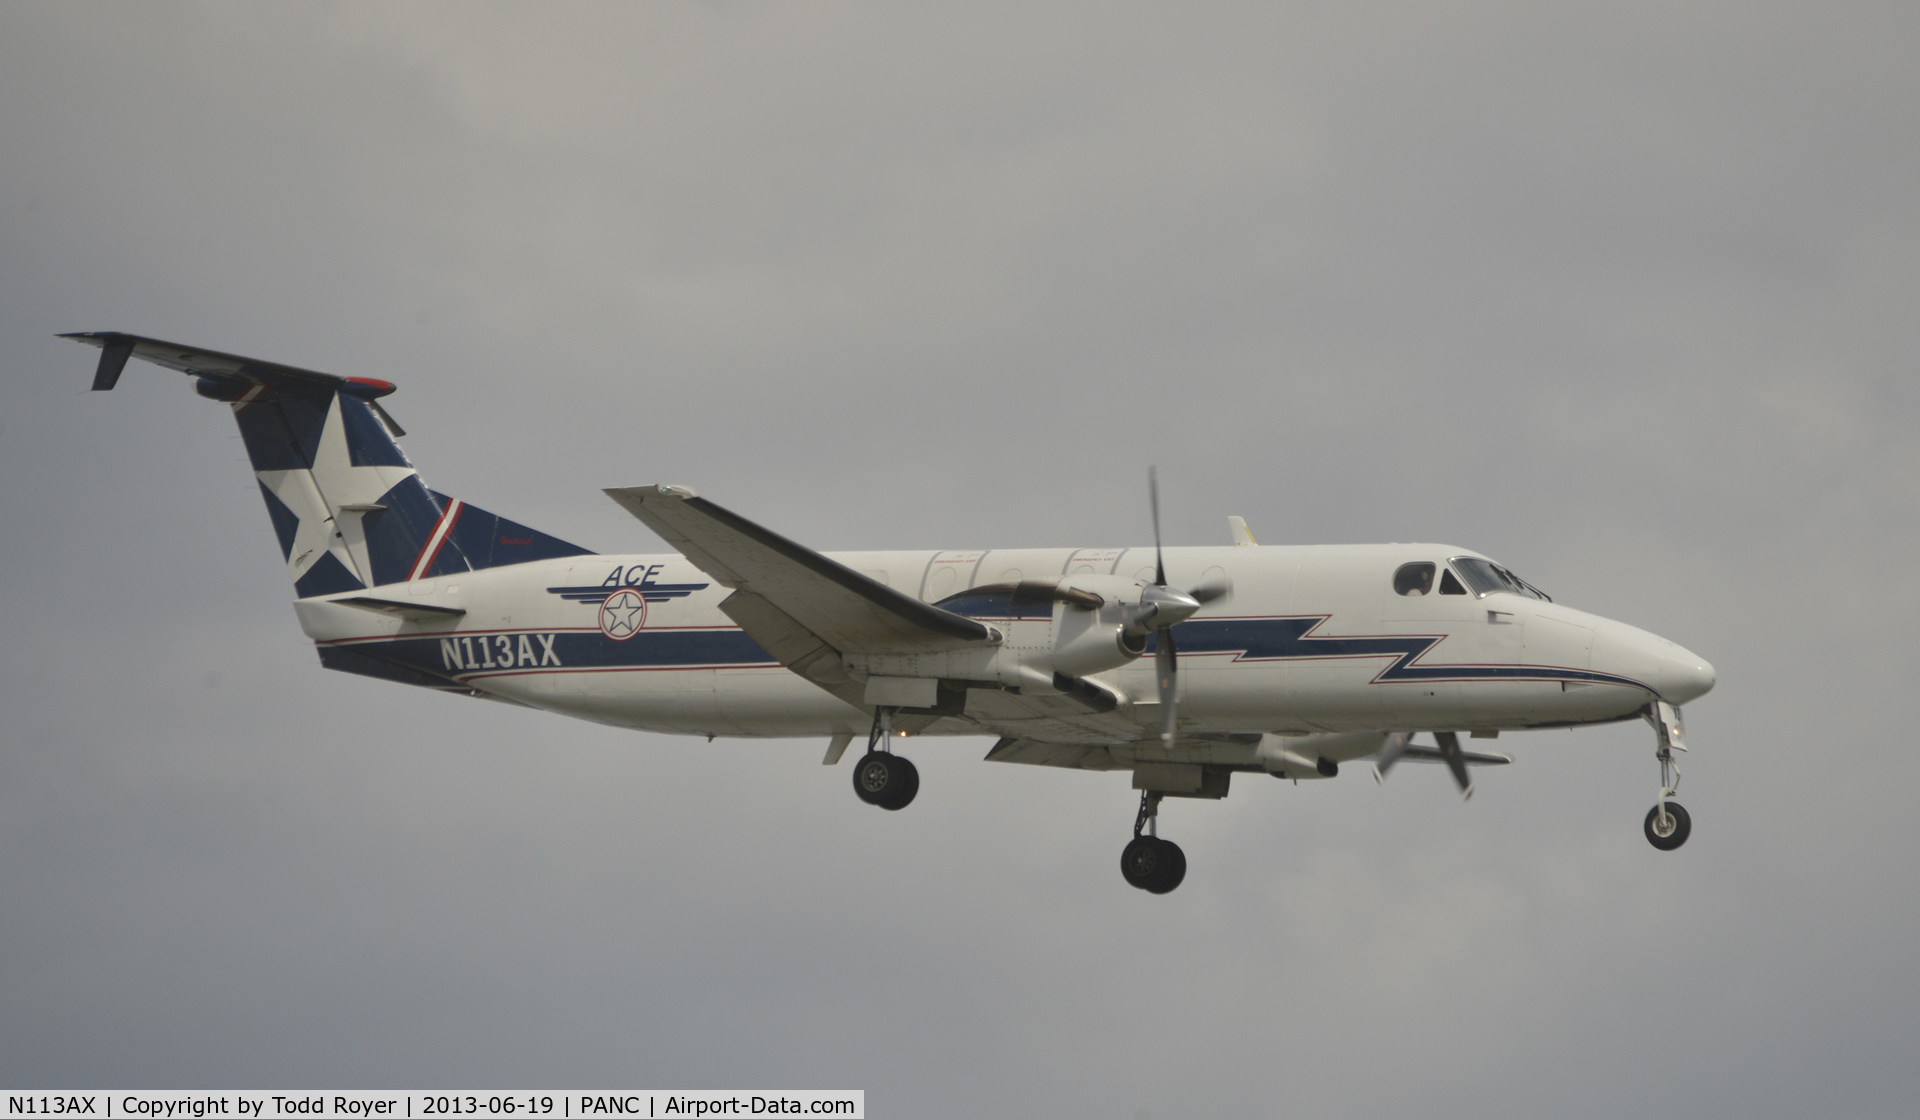 N113AX, 1988 Beech 1900C C/N UC-41, Arriving at Anchorage